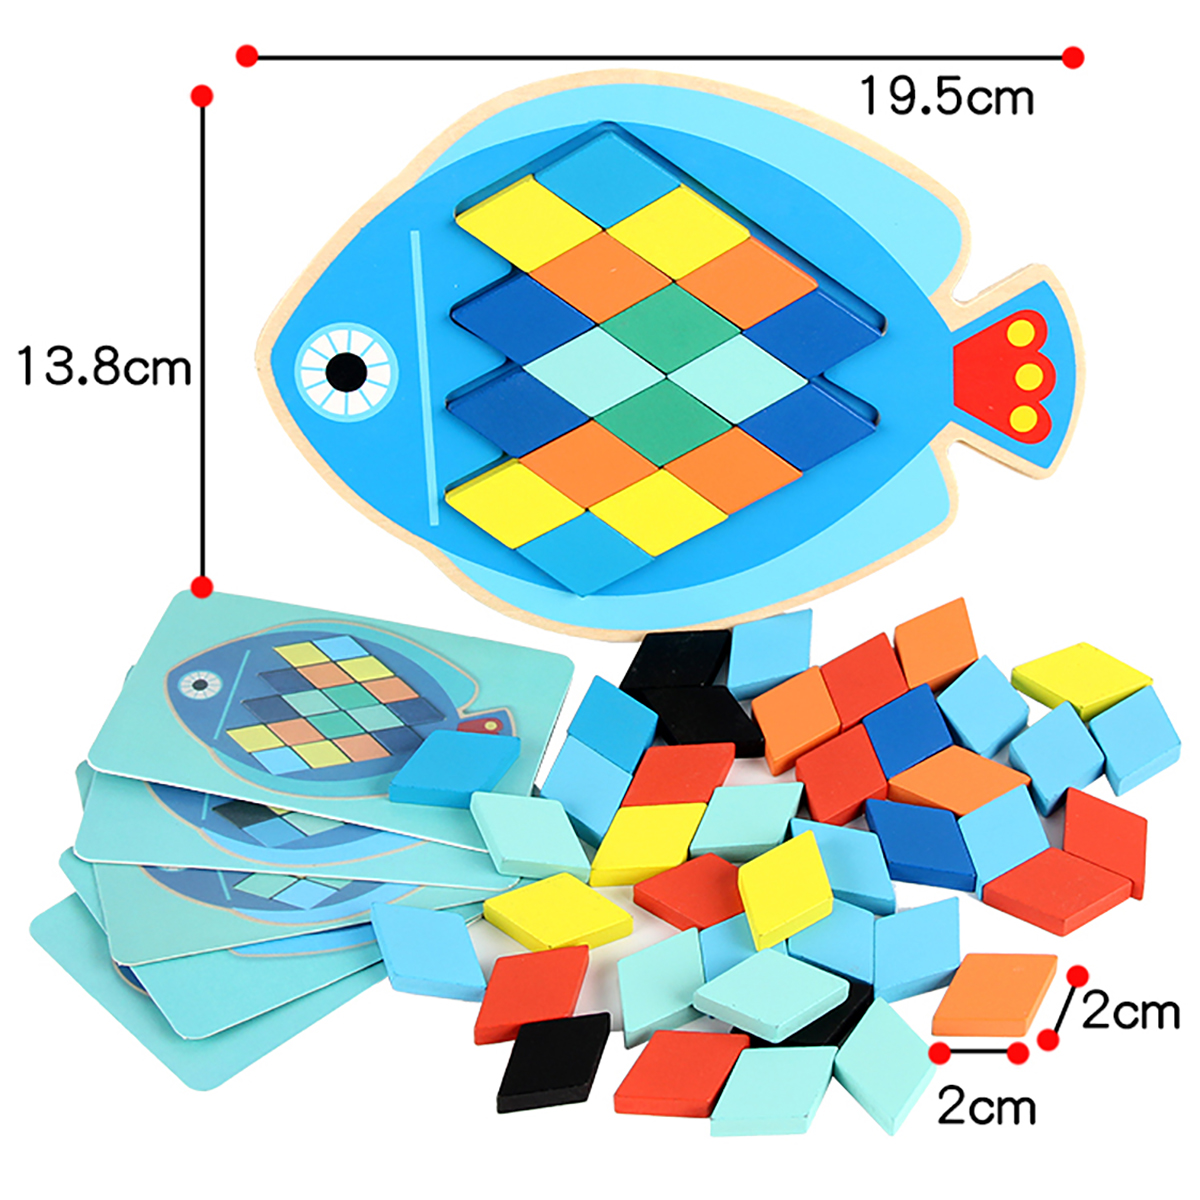 Wood-DIY-Assembly-Jigsaw-Puzzle-Toy-Colors-Shapes-Cartoon-Fish-Owl-Matching-Cards-Toy-for-Children-L-1682195-10